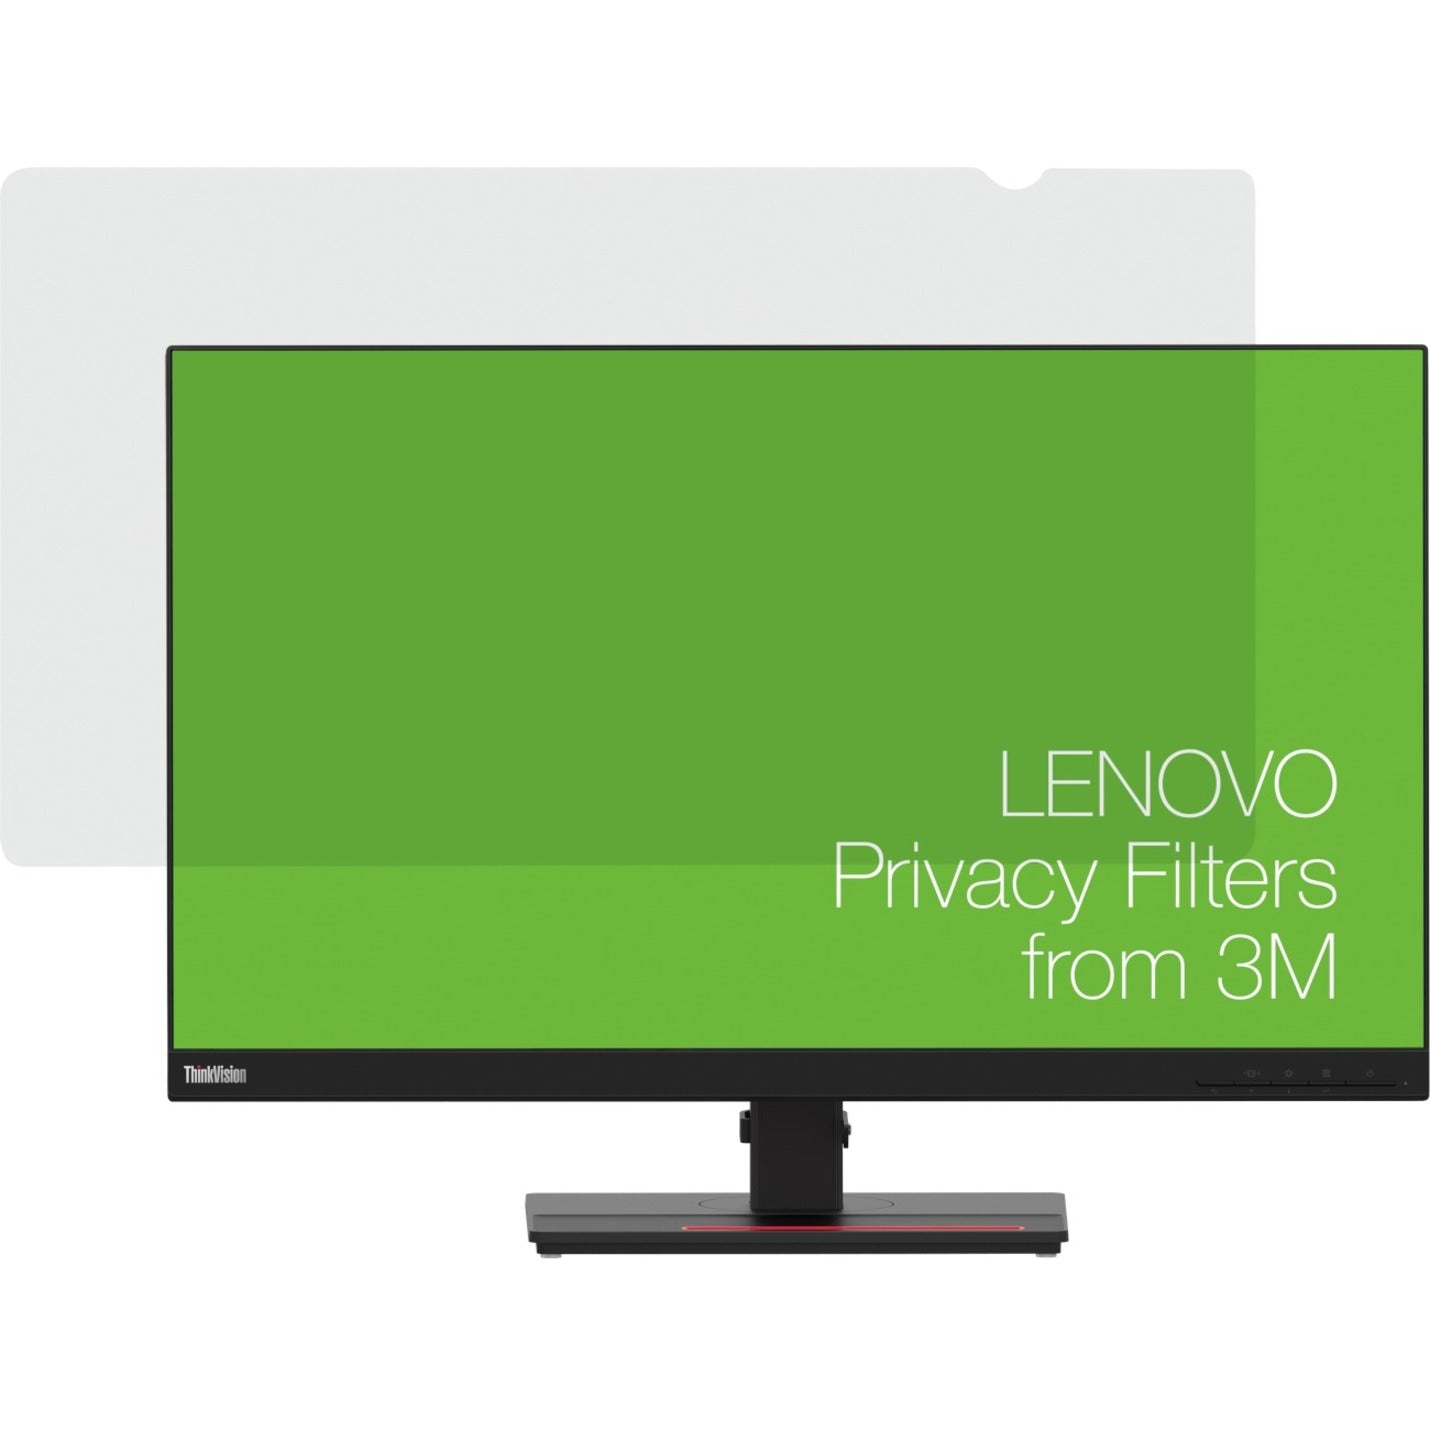 Lenovo 4XJ1D33882 Privacy Screen Filter, Reversible, Easy Clean, Easy to Apply, Privacy